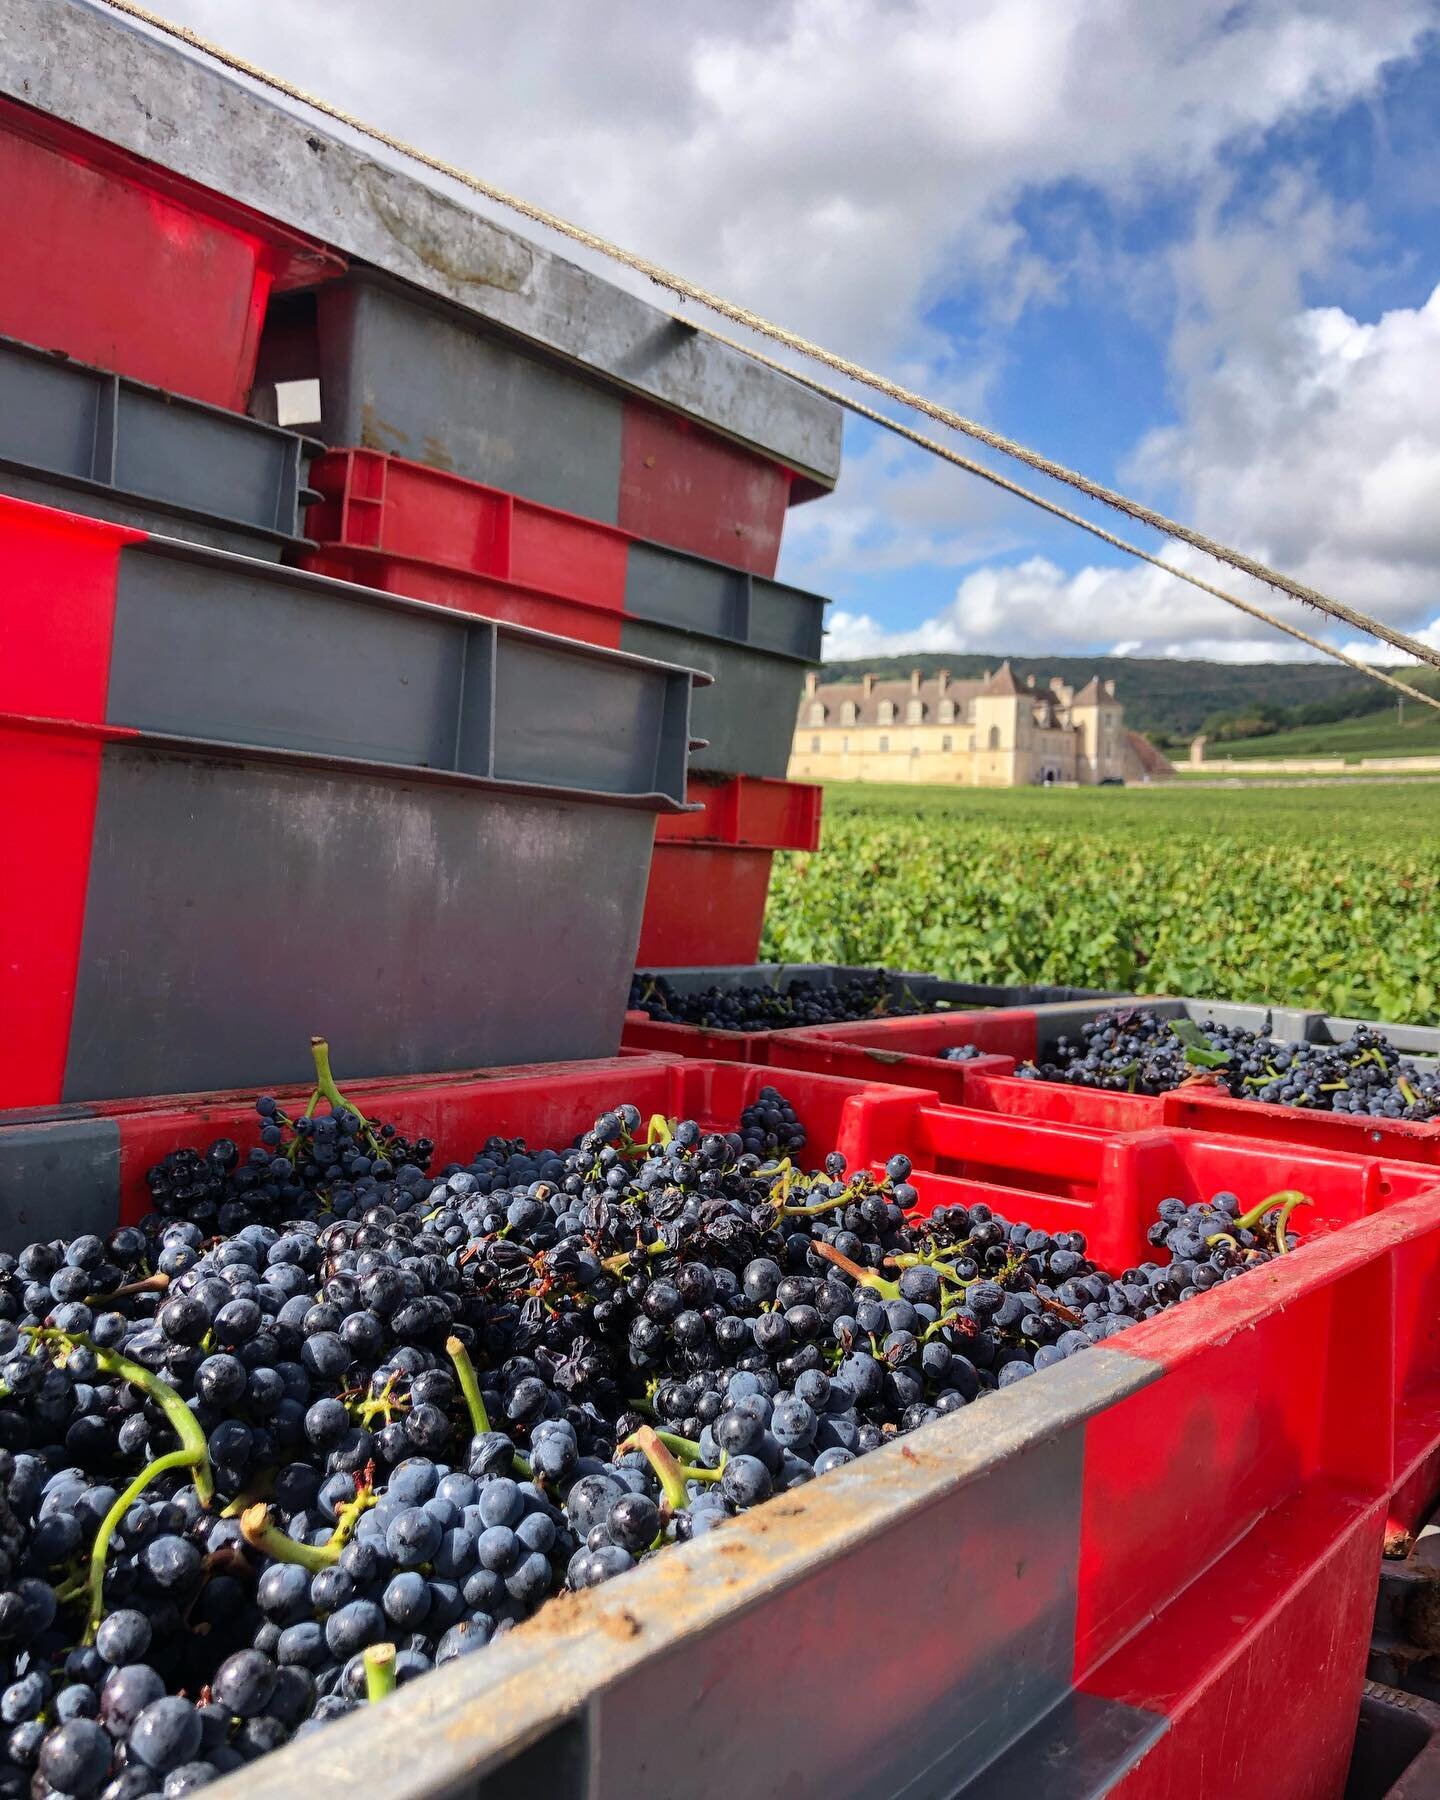 Harvest day for Domaine de Montille in the Clos de Vougeot vineyard with the Chateau in the background. I followed the Pinot Noir grapes from the vineyard to the cellar.  Working the line is @etiennedemontille and then we see the fruit which will be 